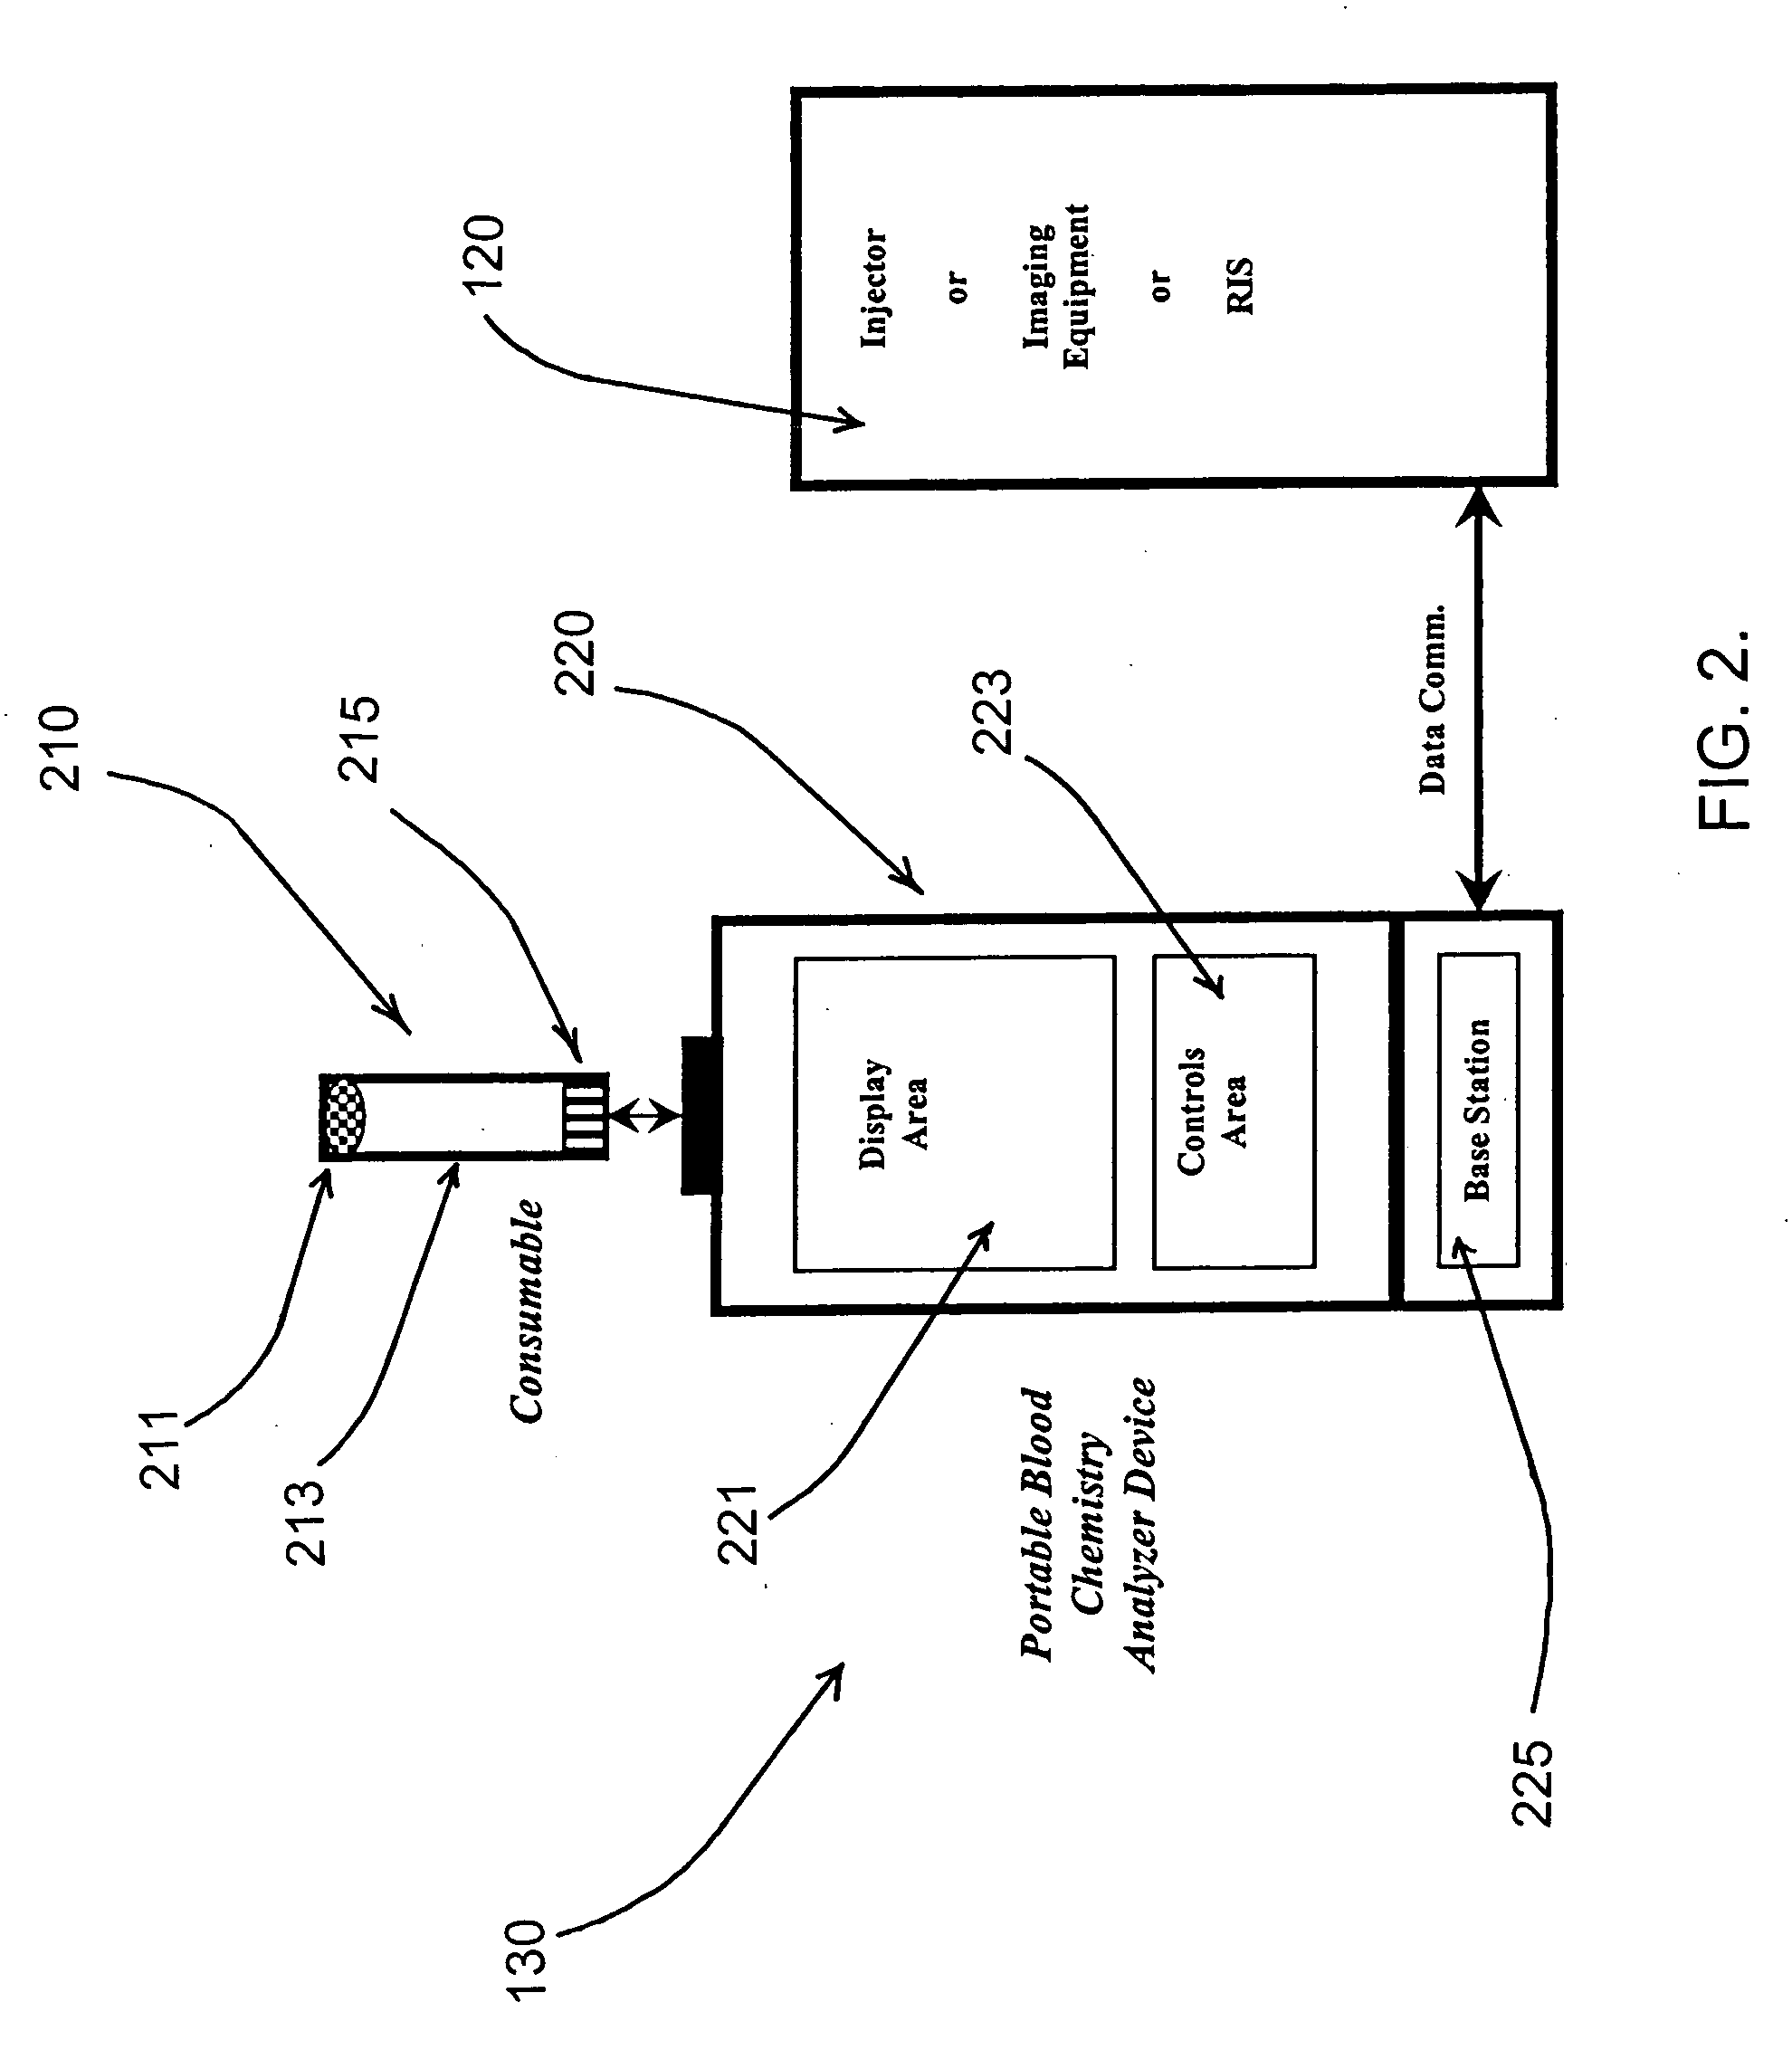 Medical imaging system, dispensing system, method, and computer program product for assessing patient renal function prior to dispensing a contrast media as part of a medical imaging procedure